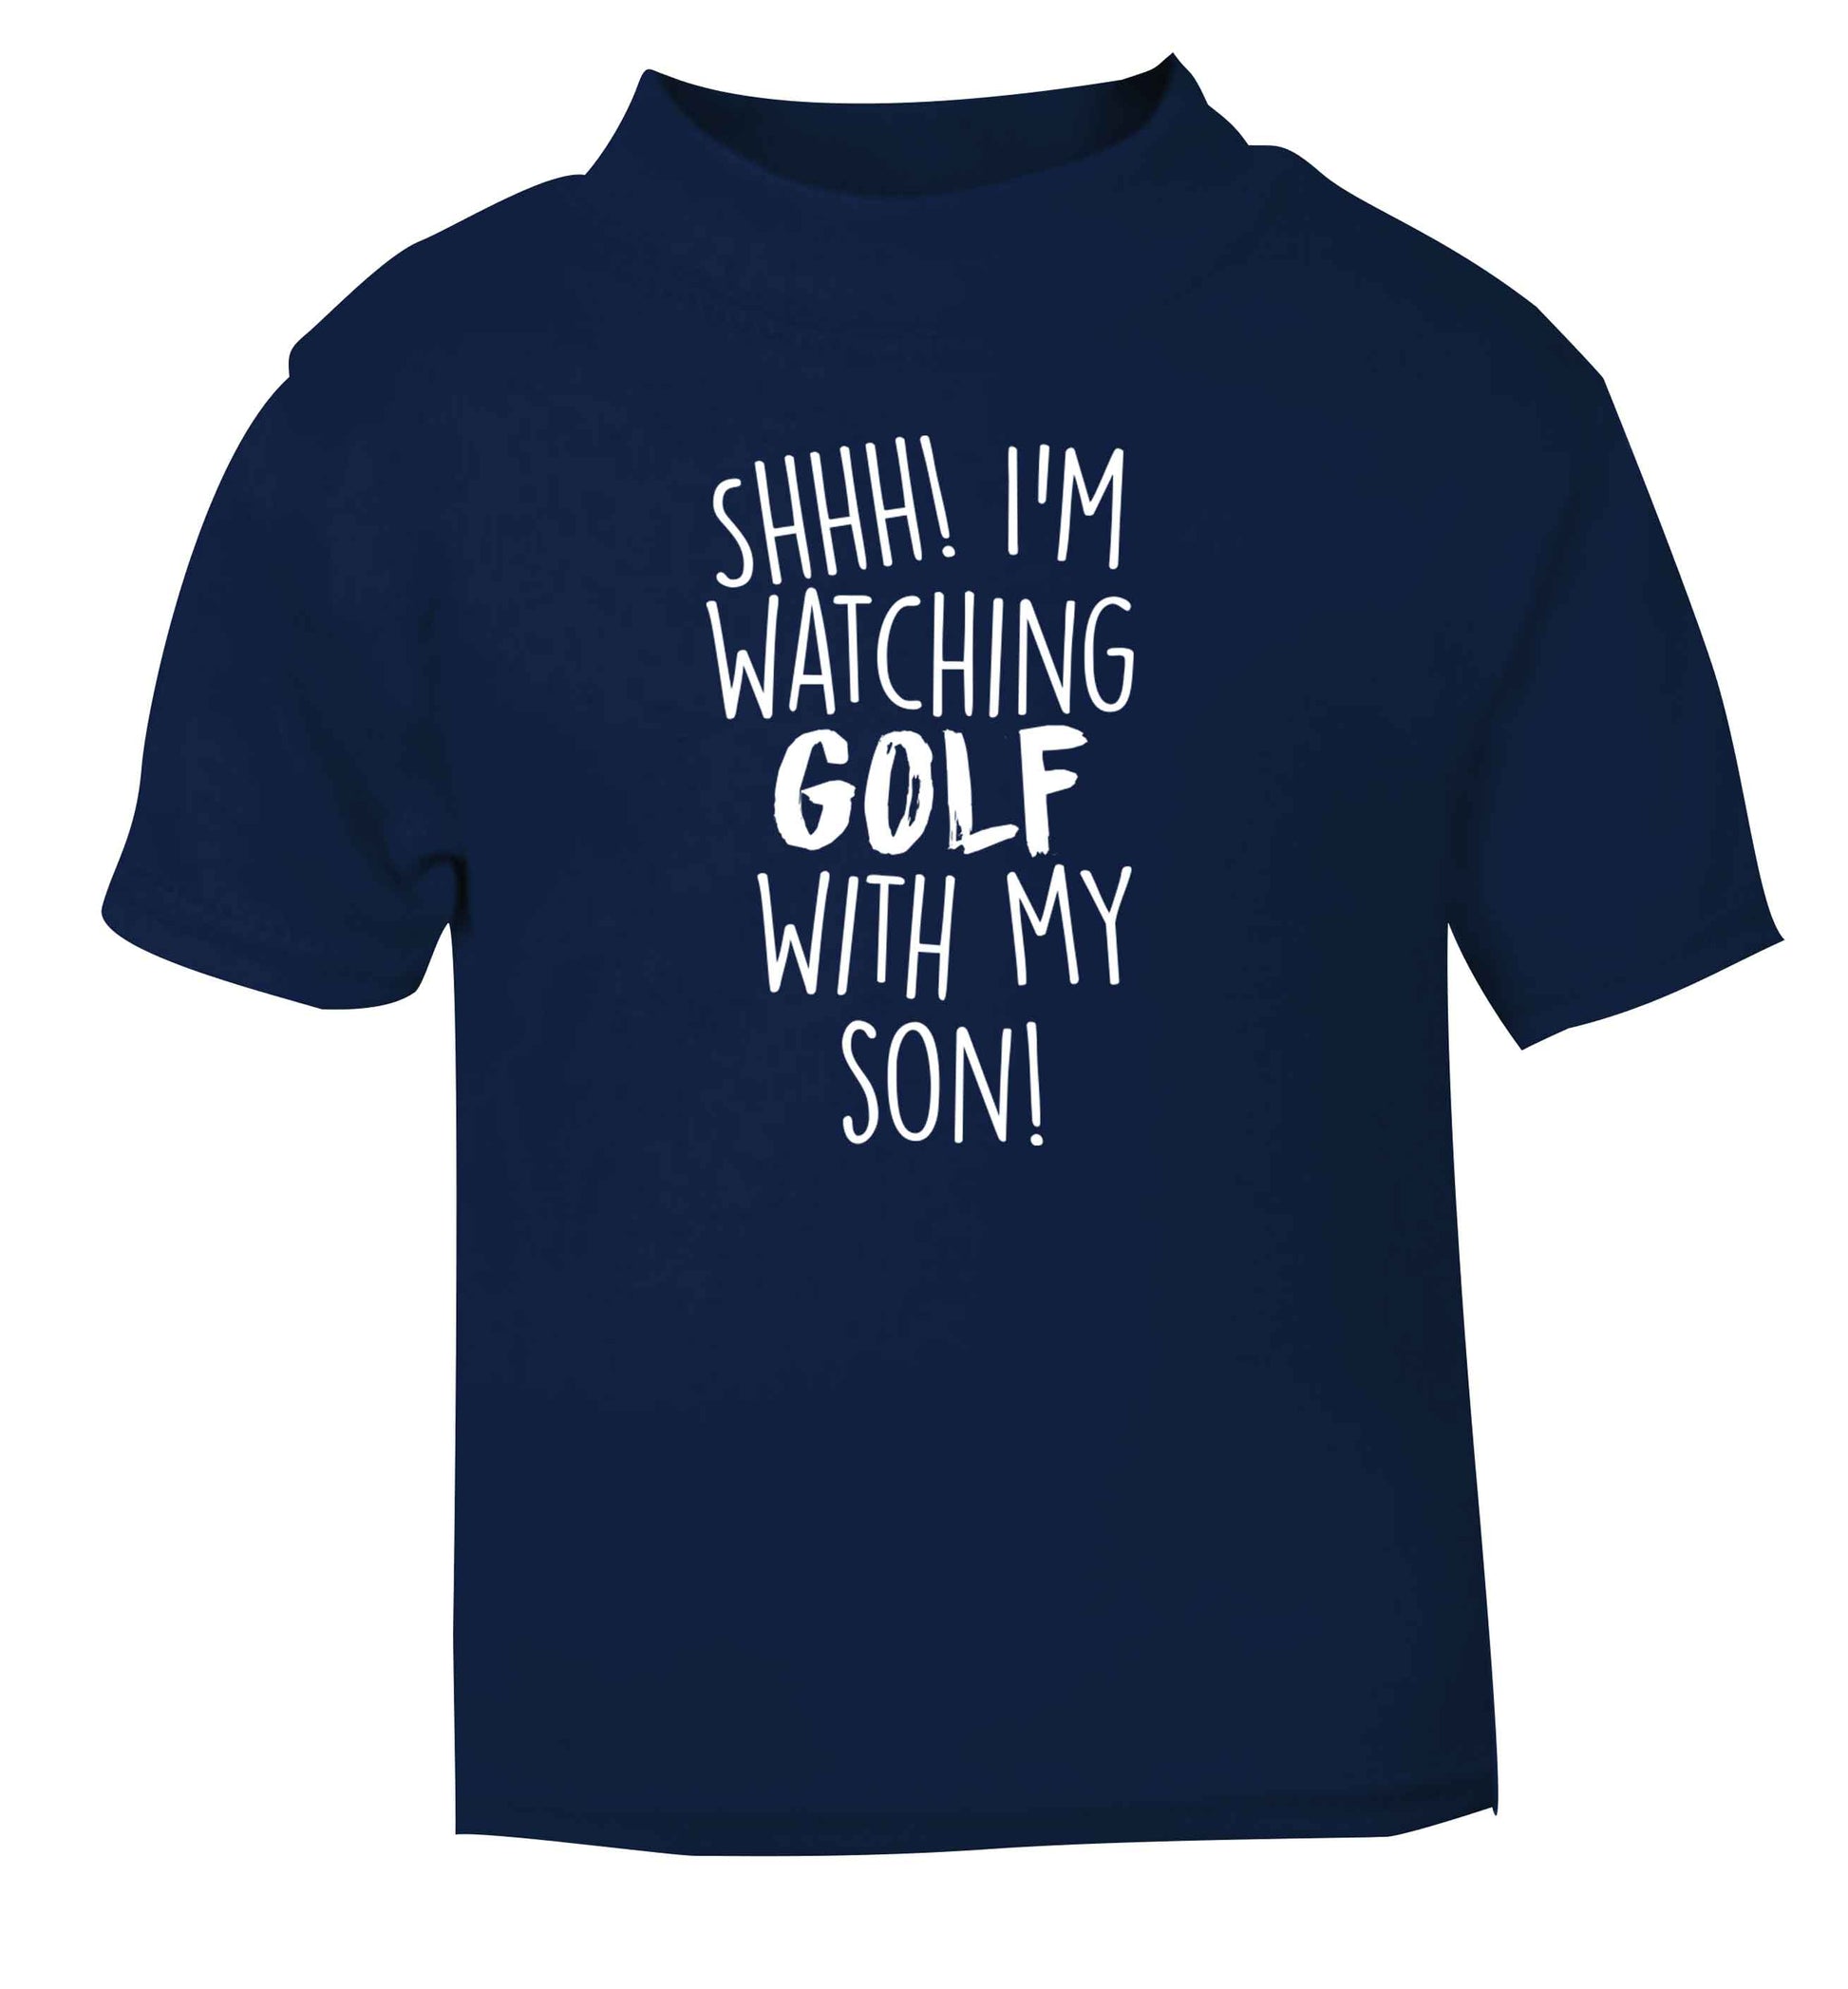 Shh I'm watching golf with my son navy Baby Toddler Tshirt 2 Years